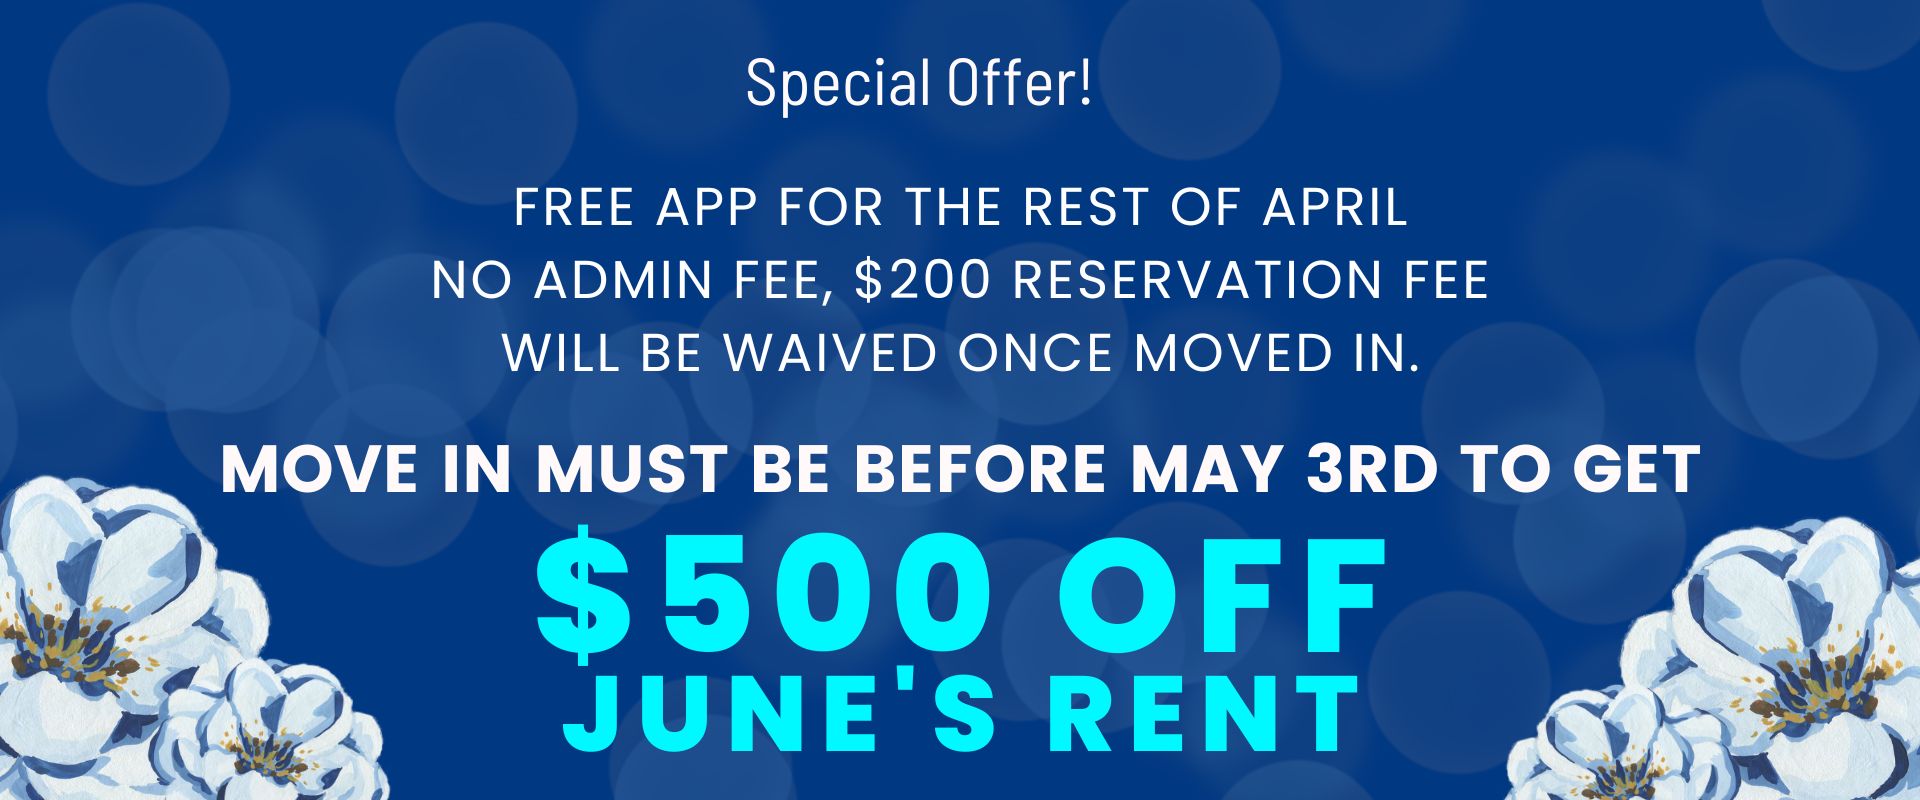 Free app for the rest of April. No admin fee, $200 reservation fee will be waived once moved in.  Move in must be before May 3rd to get $500 off June's rent.